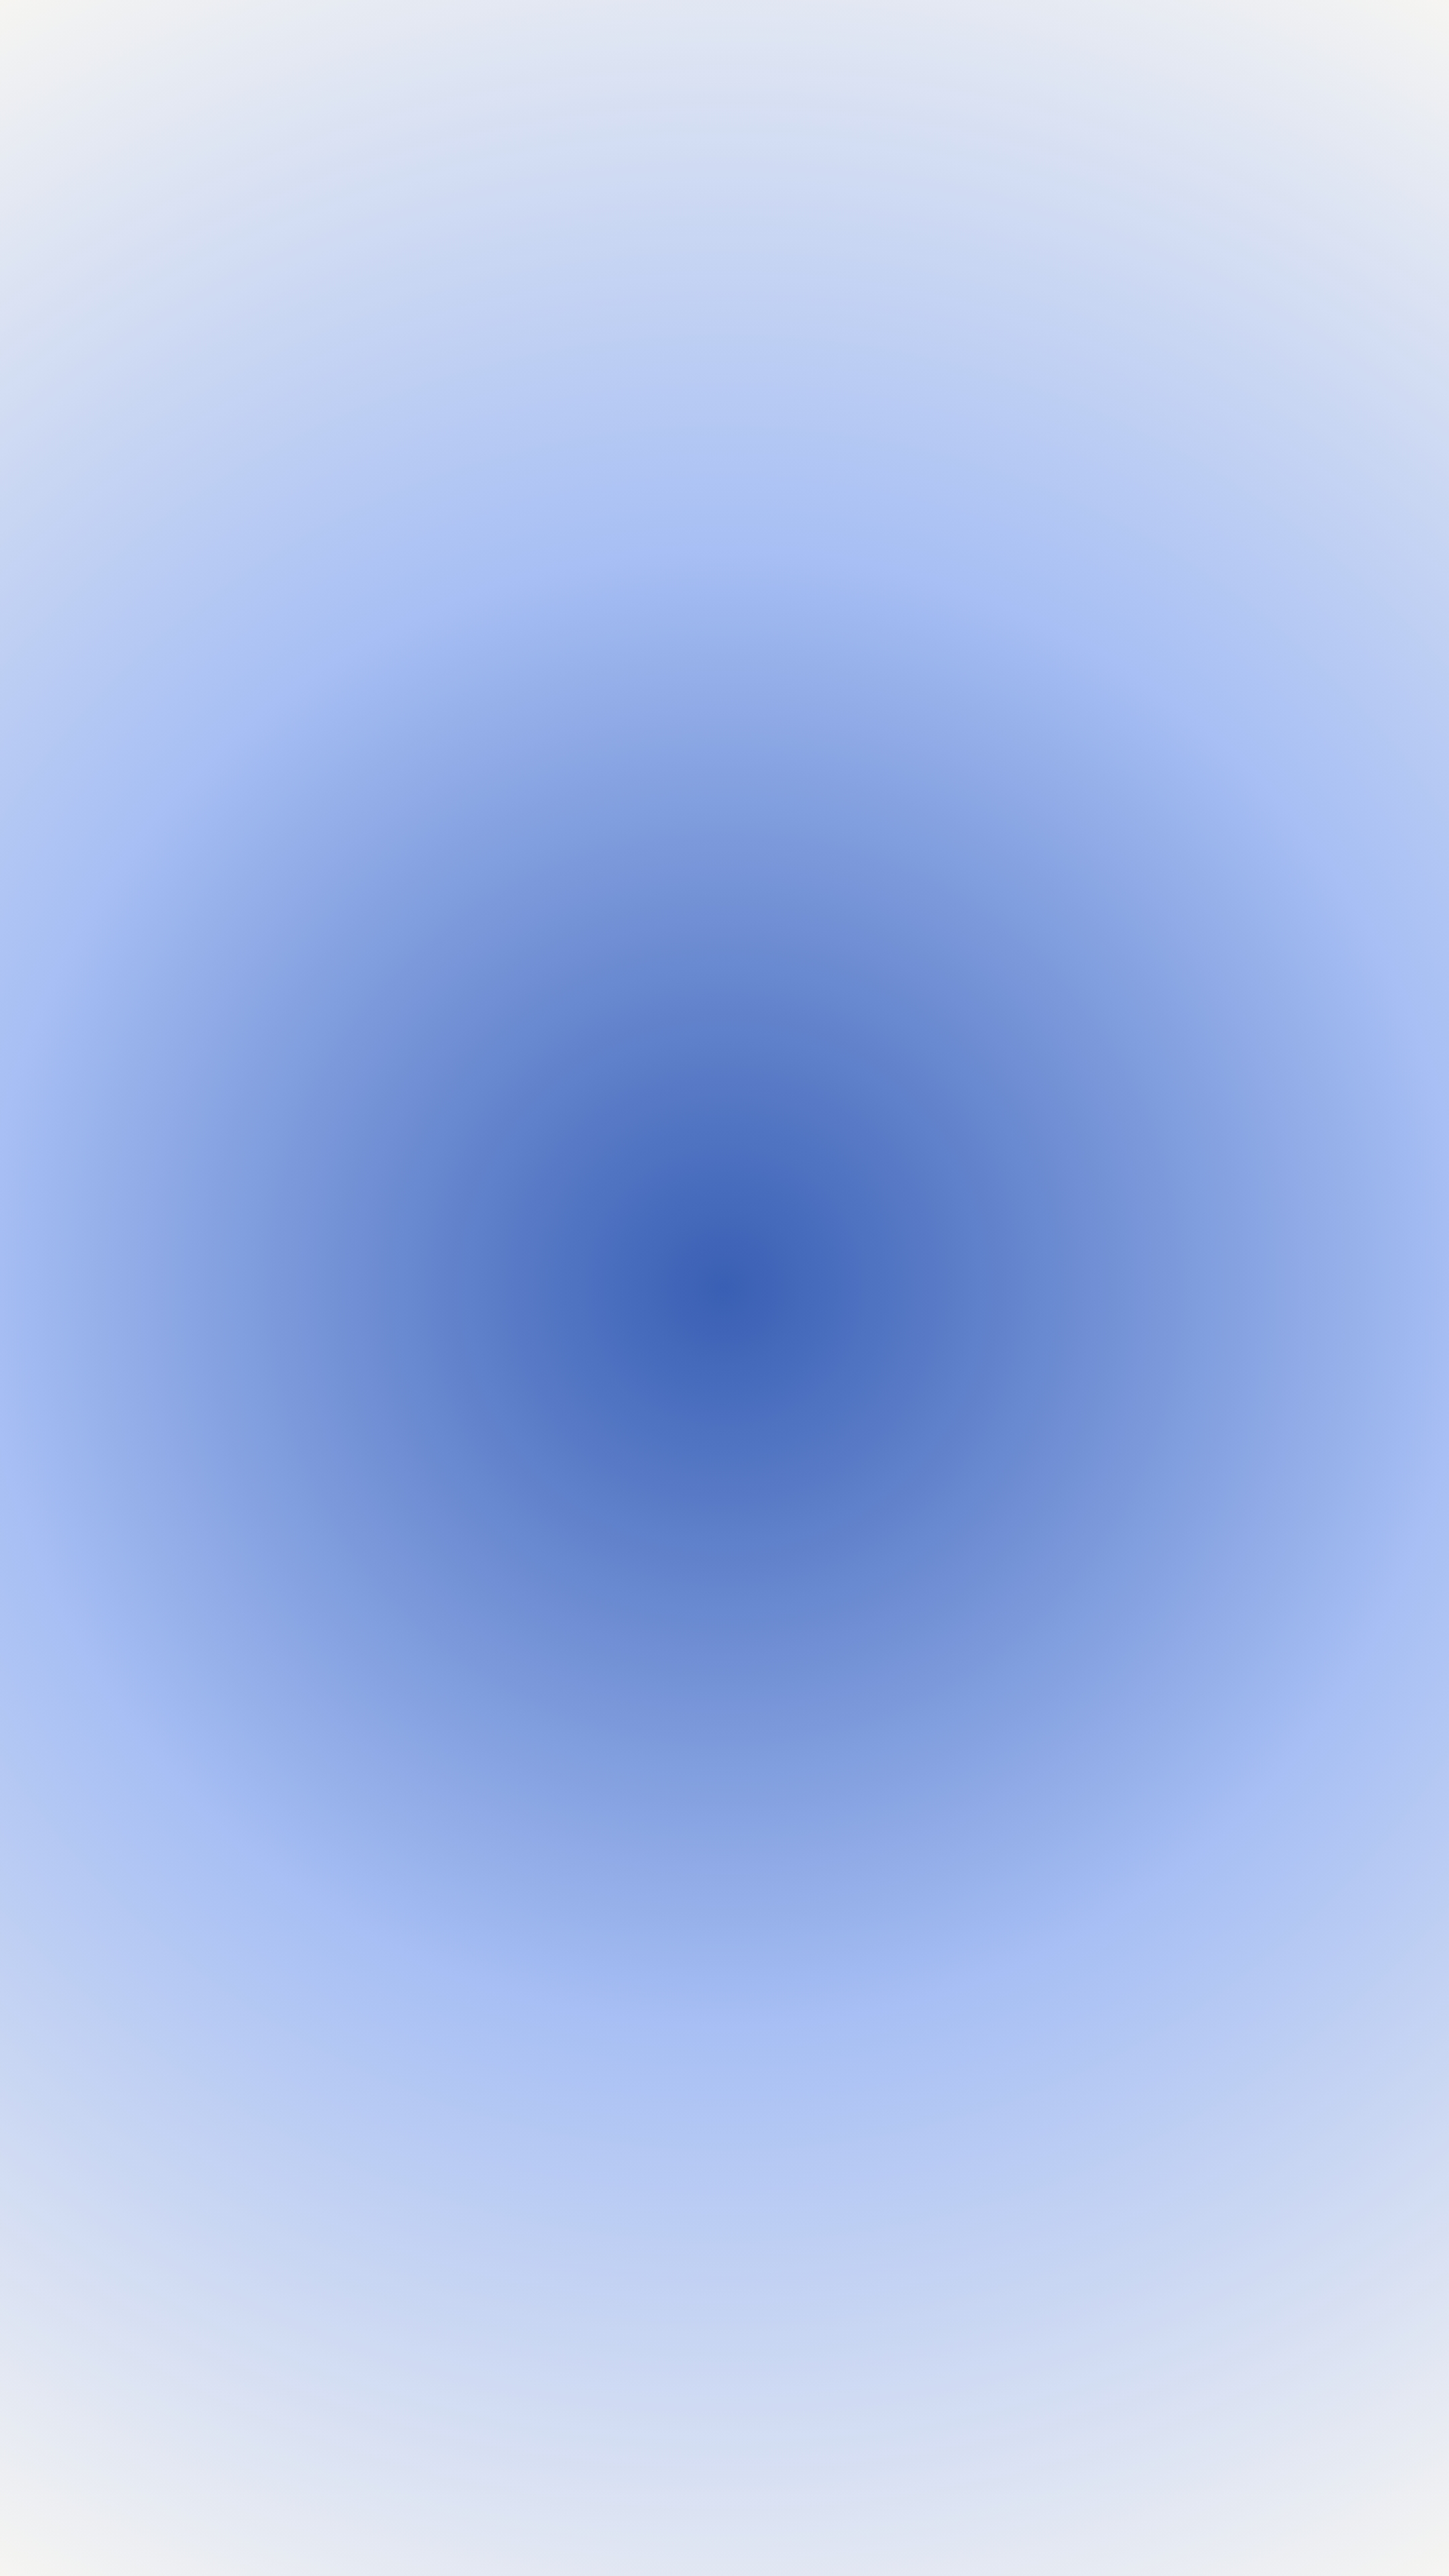 Blue Gradient Swirl for Your Screen Ფონი[2b8129ccf43141a48f1e]